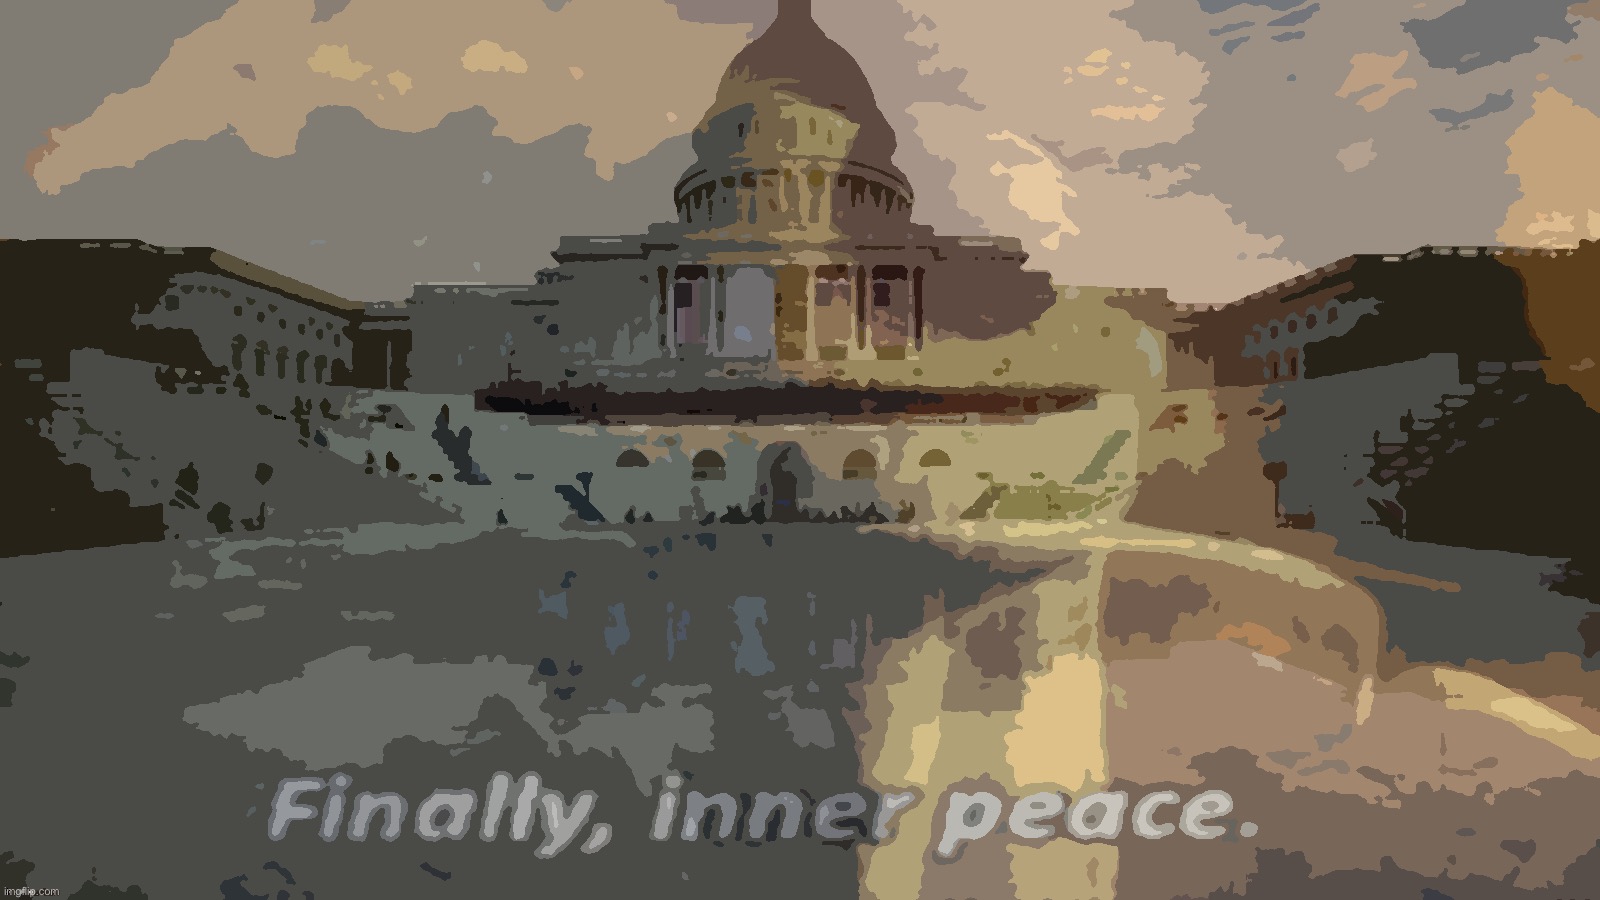 Life doesn’t promise lasting inner peace, only moments of relative calm. Take them. :) | image tagged in inauguration finally inner peace,finally inner peace,inauguration,inauguration day,inner,peace | made w/ Imgflip meme maker